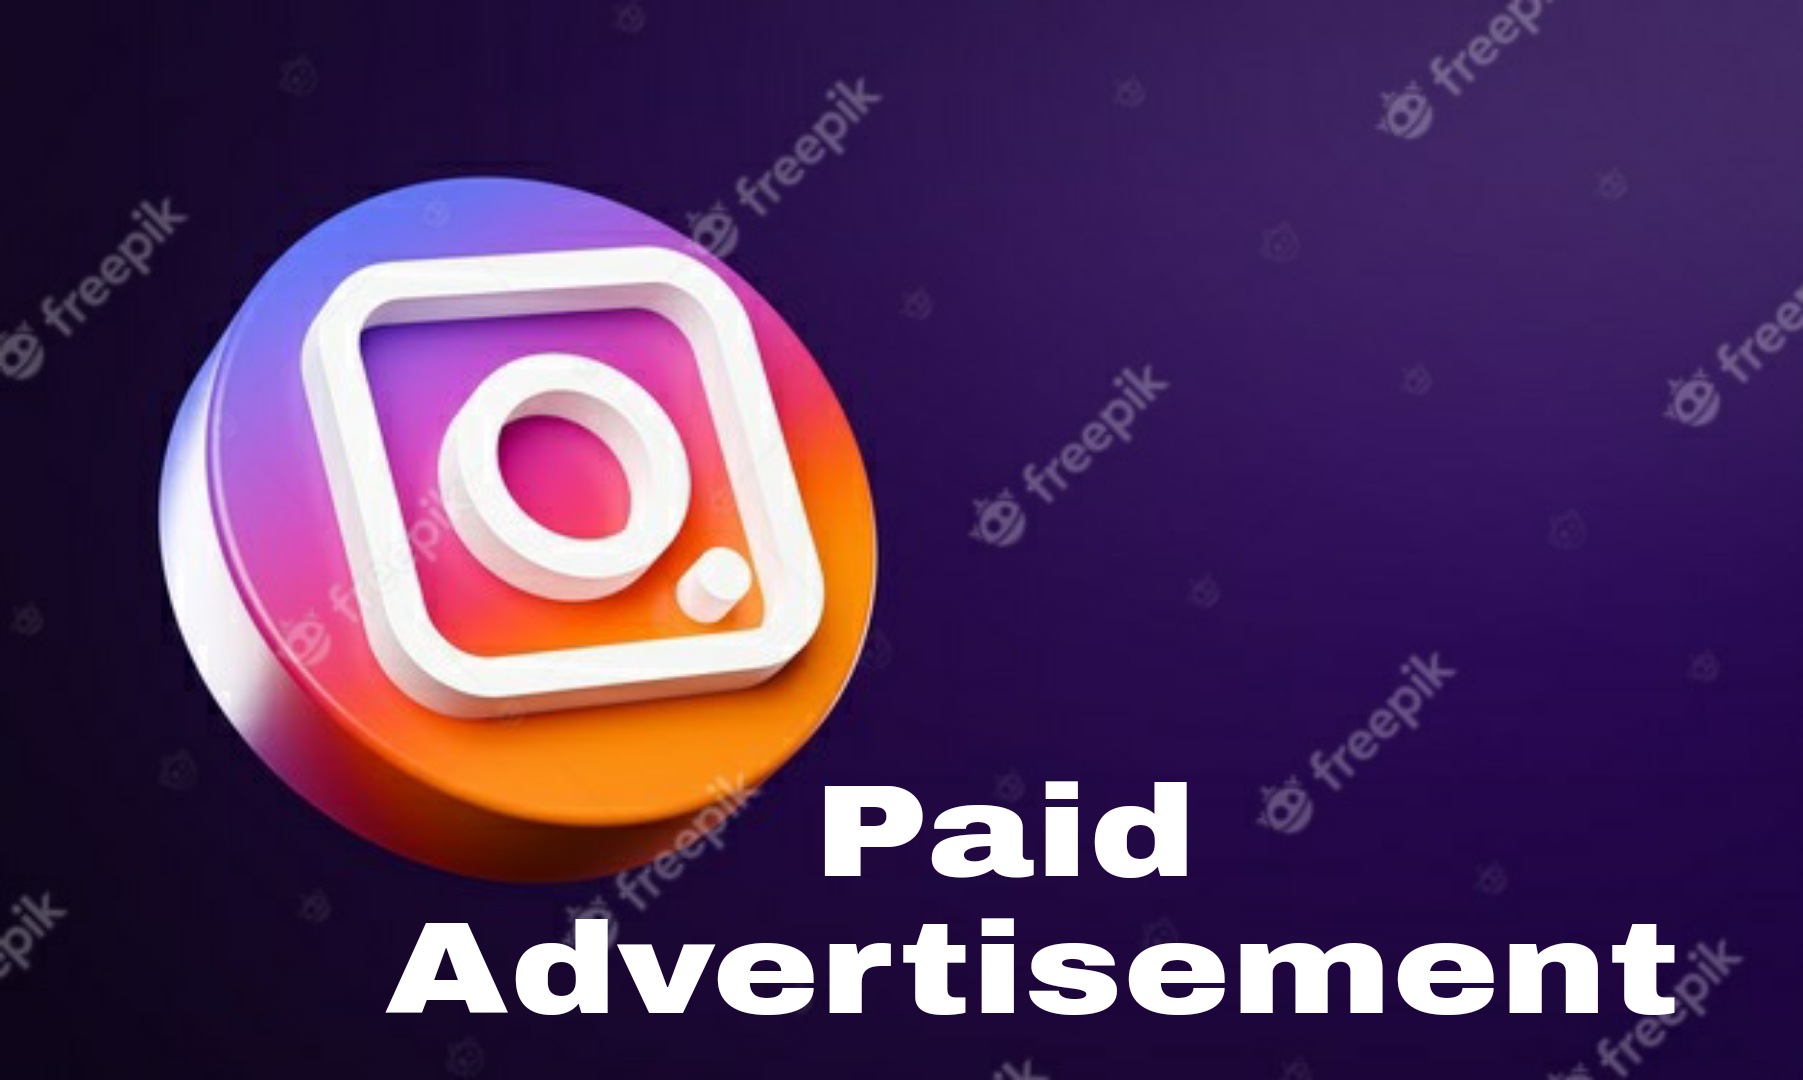 All about Instagram paid advertisement